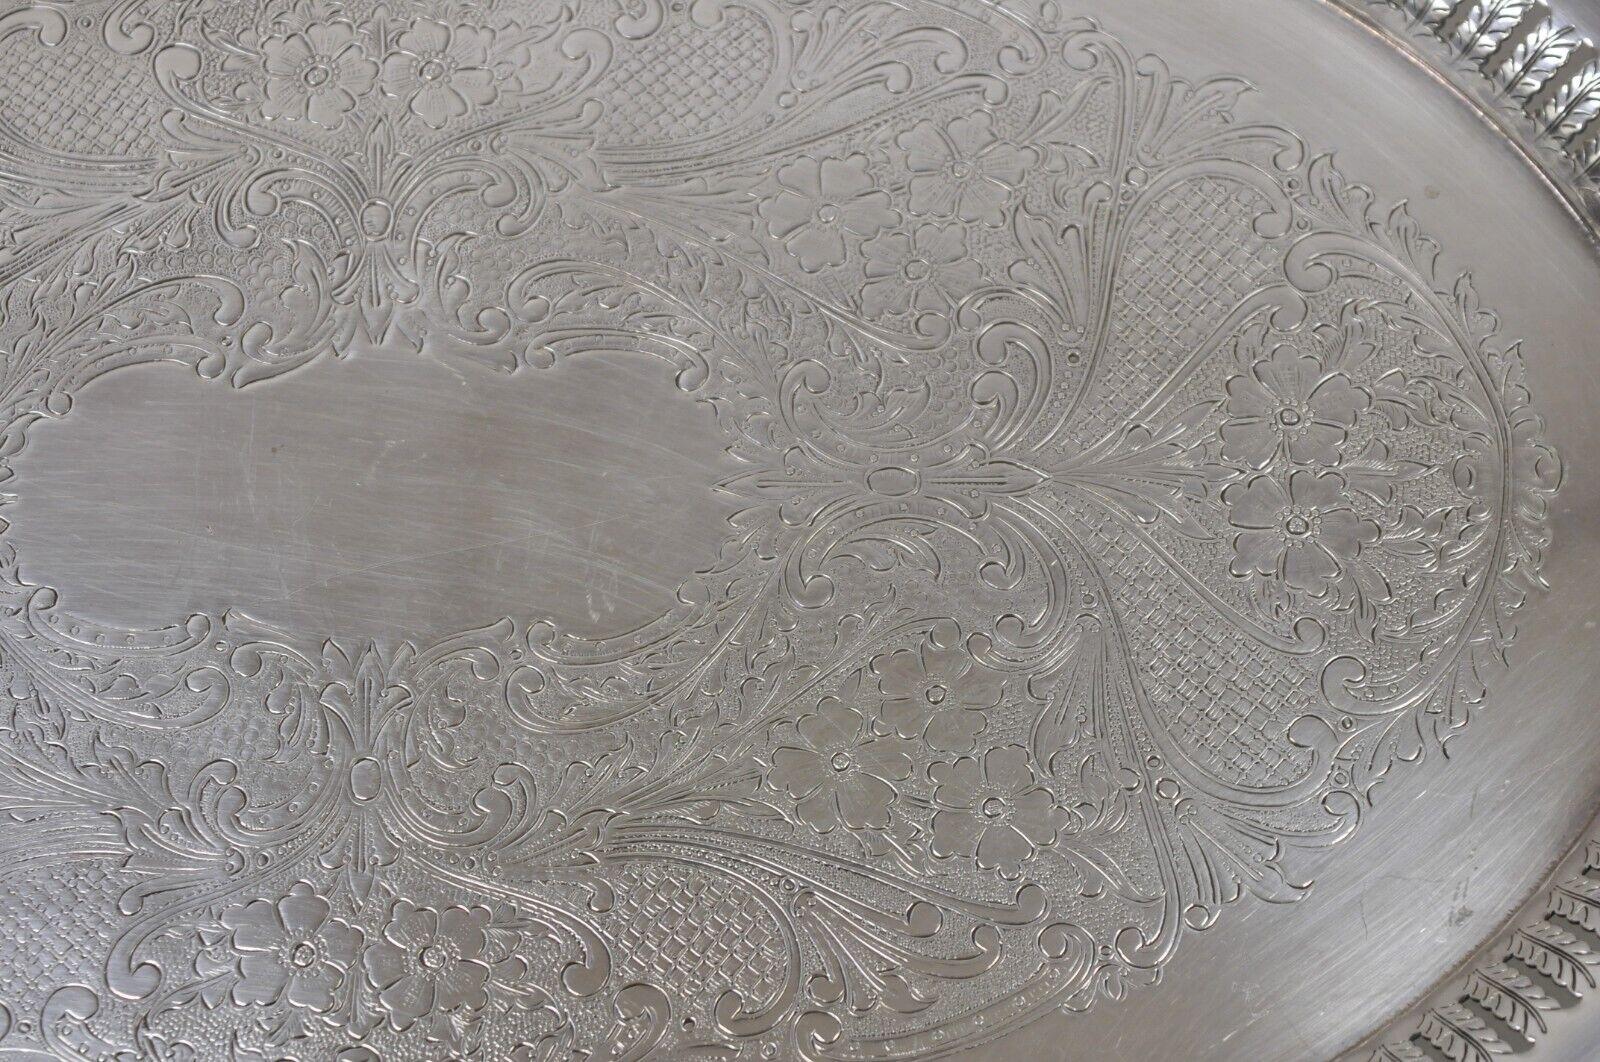 Antique Edwardian Silver Plated Oval Serving Platter Tray w/ Pierced Decoration 4